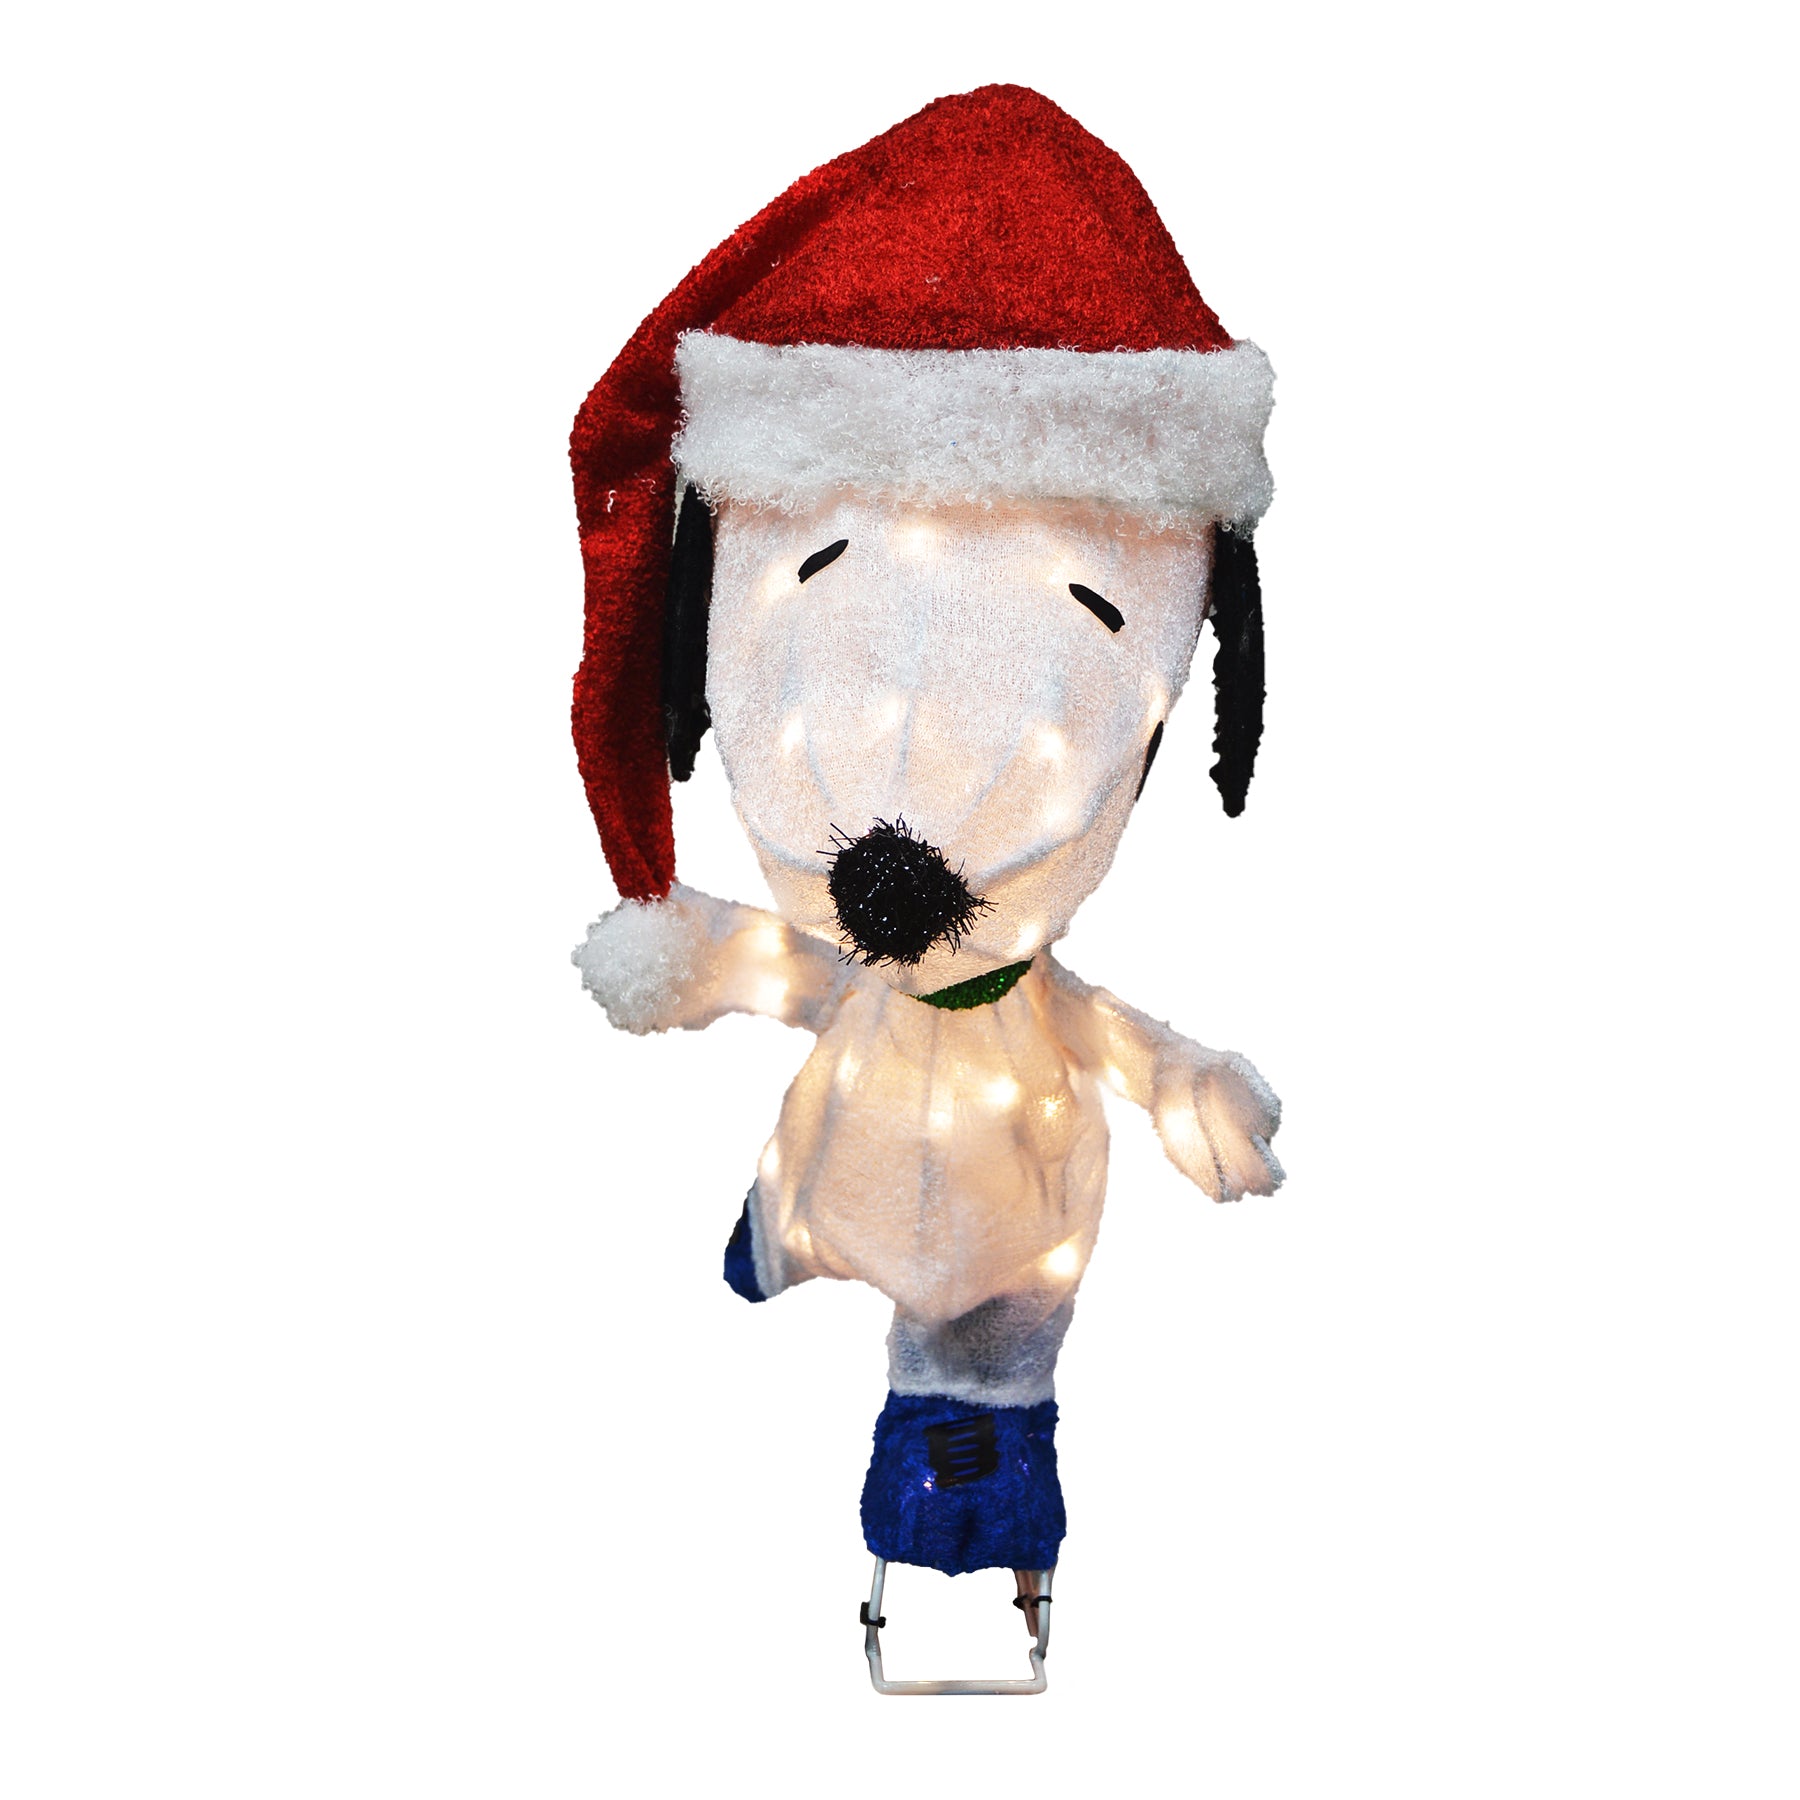 ProductWorks 24IN PEANUTS LED 3D PRELIT YARD DÉCOR SKATING SNOOPY, White